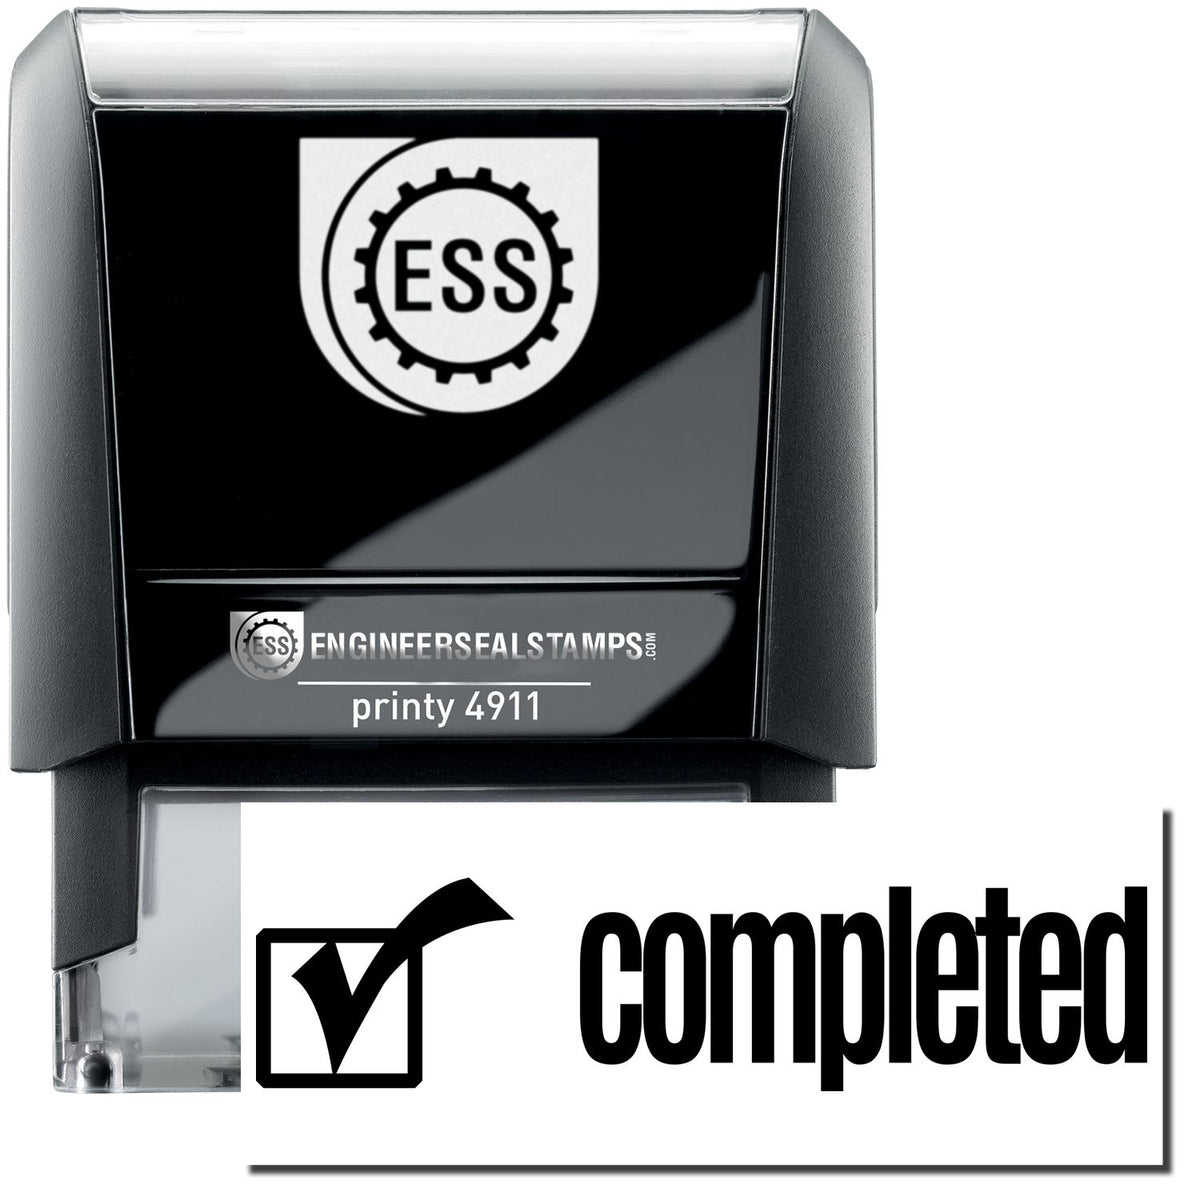 A self-inking stamp with a stamped image showing how the text &quot;completed&quot; with an icon of a checkbox on the left is displayed after stamping.